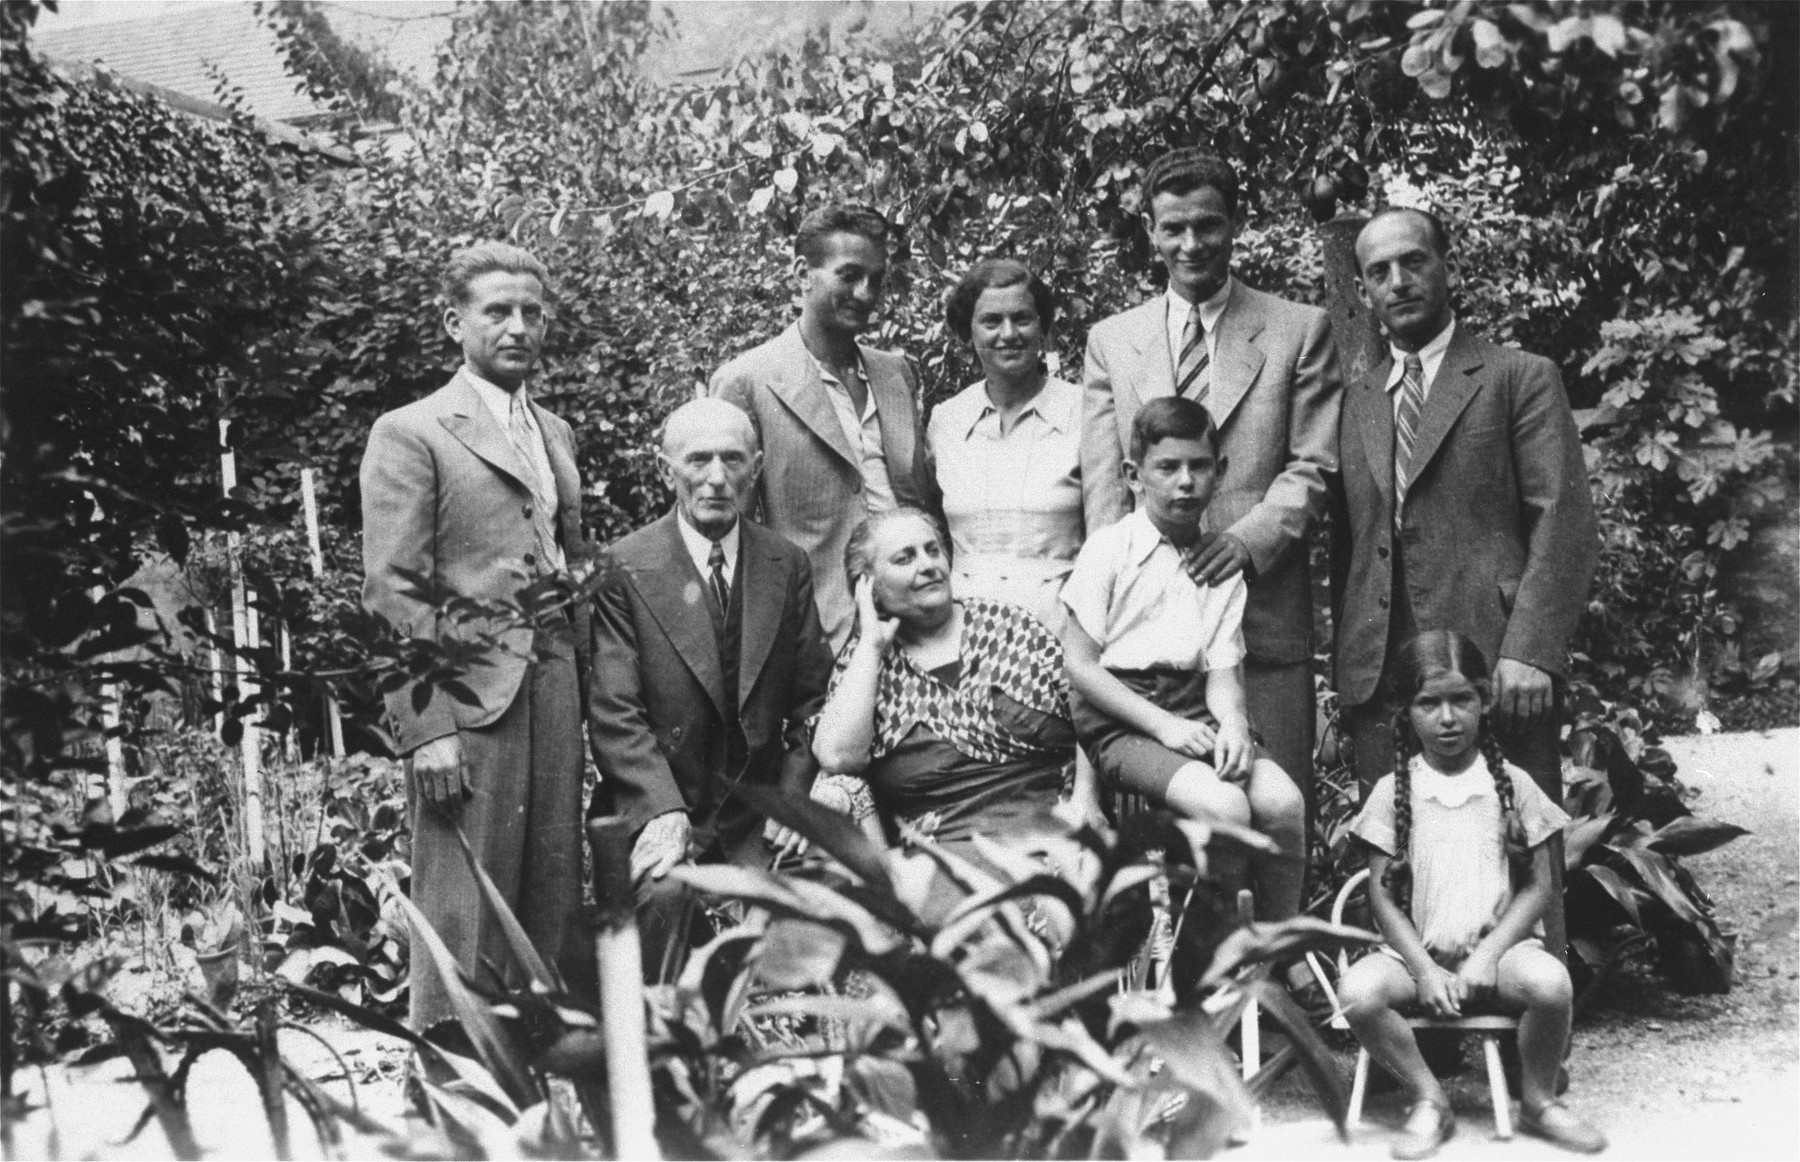 Members of the extended Klein family pose outside their home in Zagreb, Croatia.

Among those pictured are Marta and Aurel Kupfermann (the two children) and Julius and Rosa Klein (front row, left side).